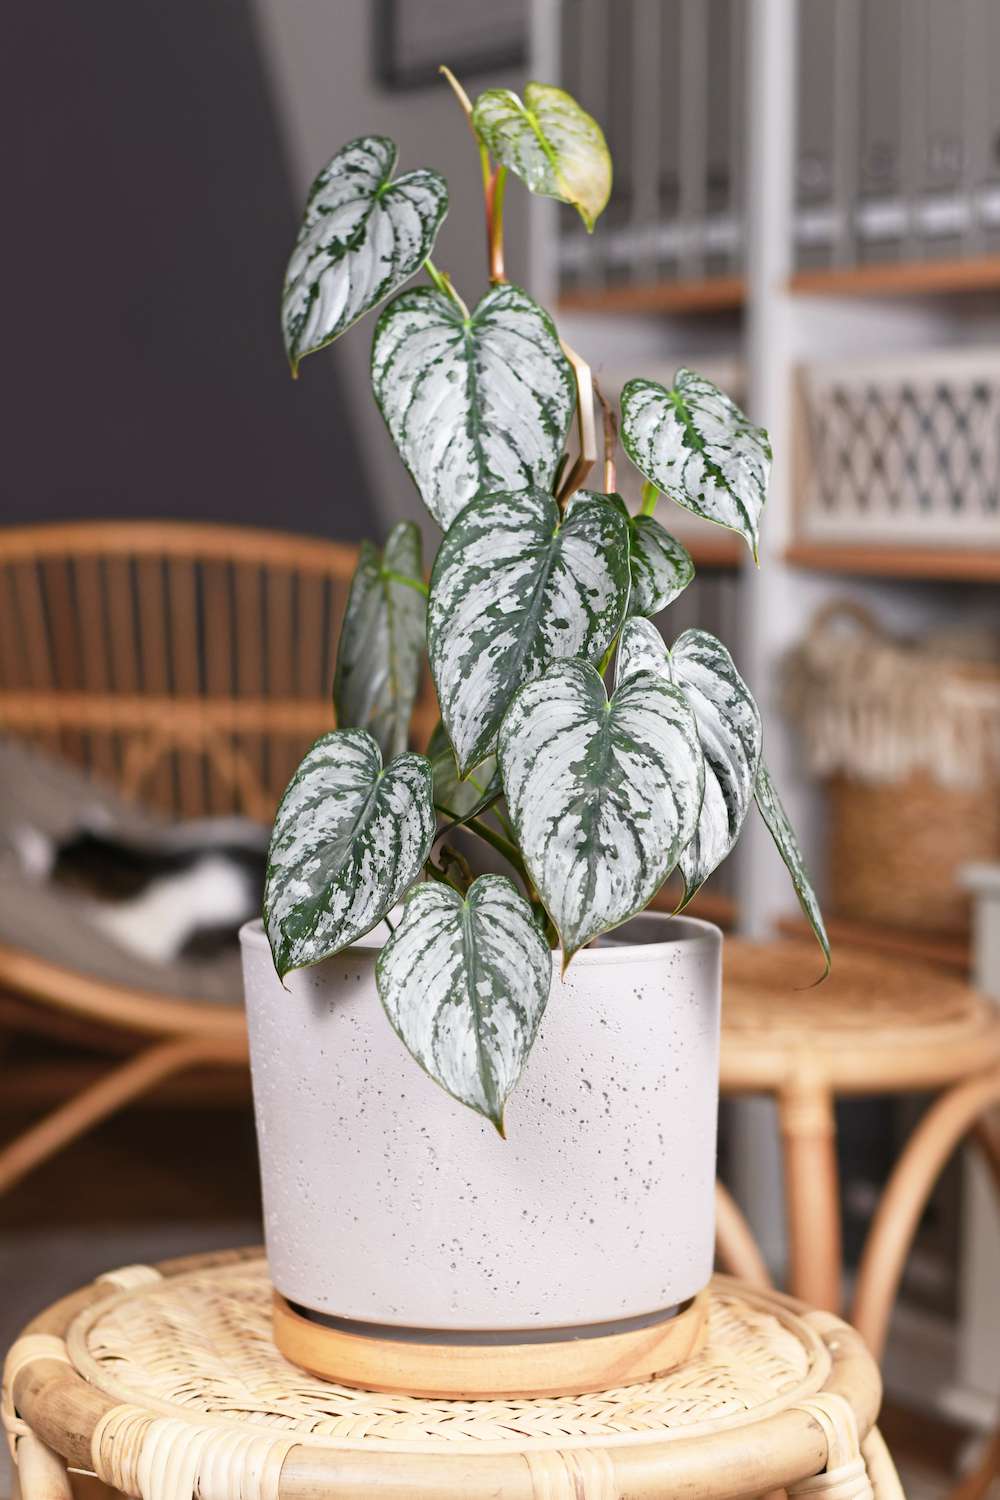 Most Popular House Plants 2022, Potted Silver Leaf Philodendron